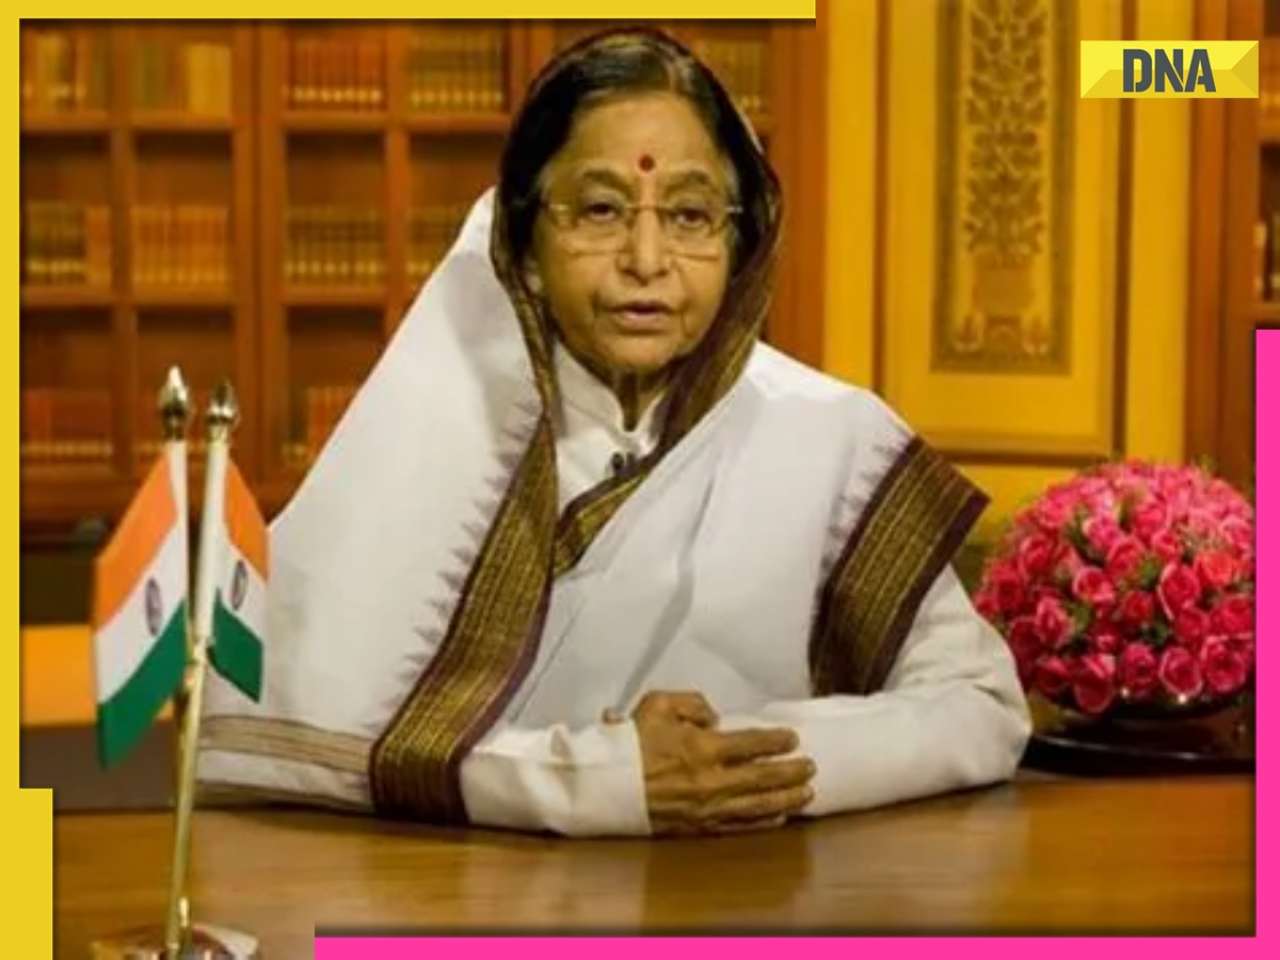 Meet Pratibha Patil, lawyer who was India's first woman President, commuted death sentence of 35 people